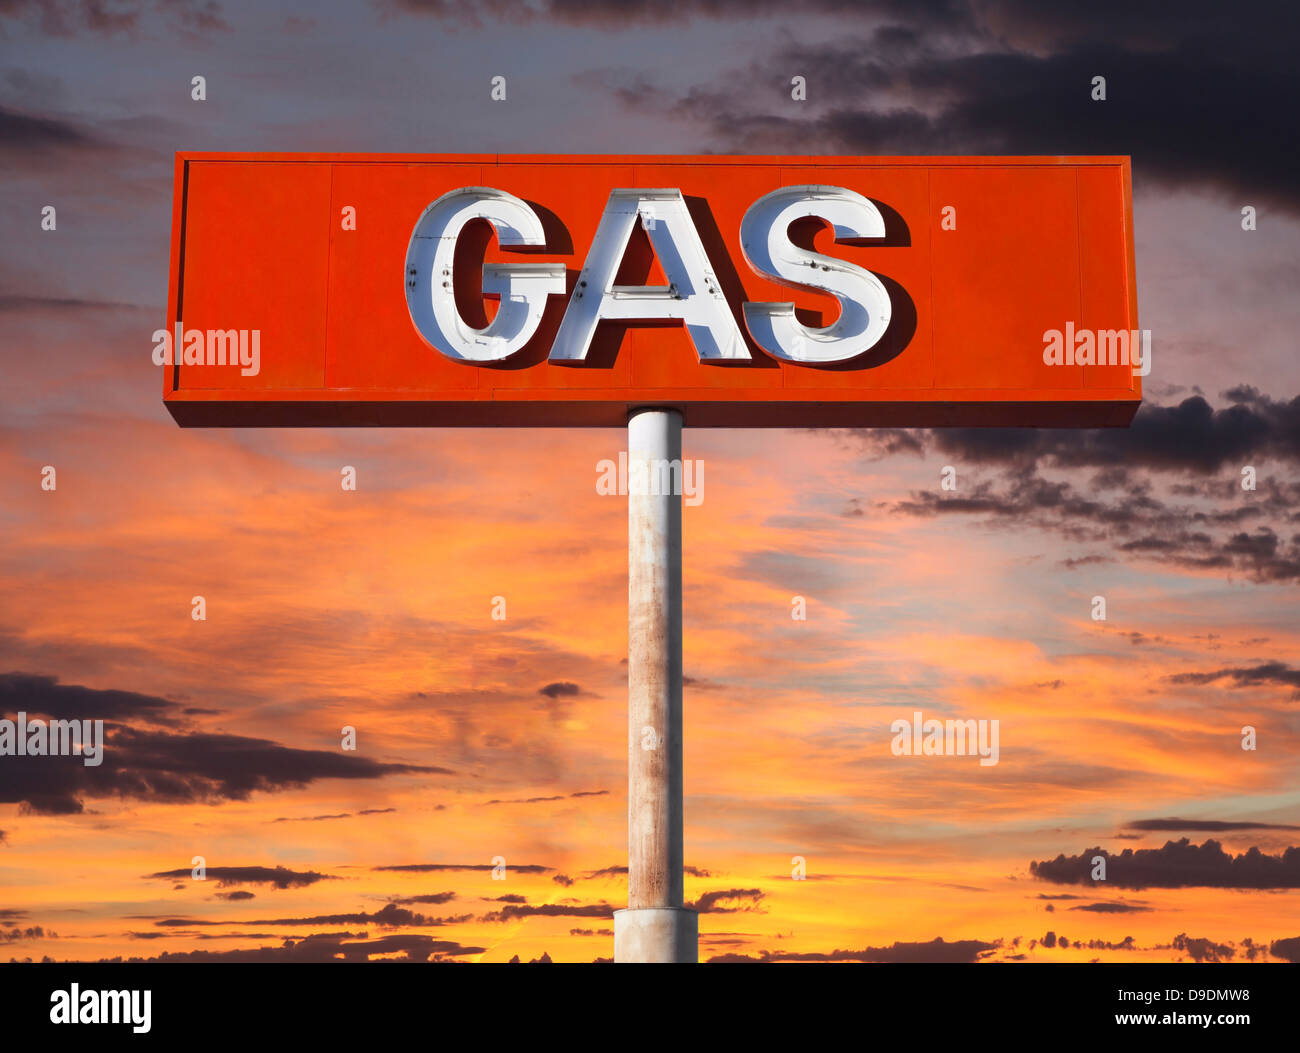 Vintage neon gas sign with sunset sky. Stock Photo